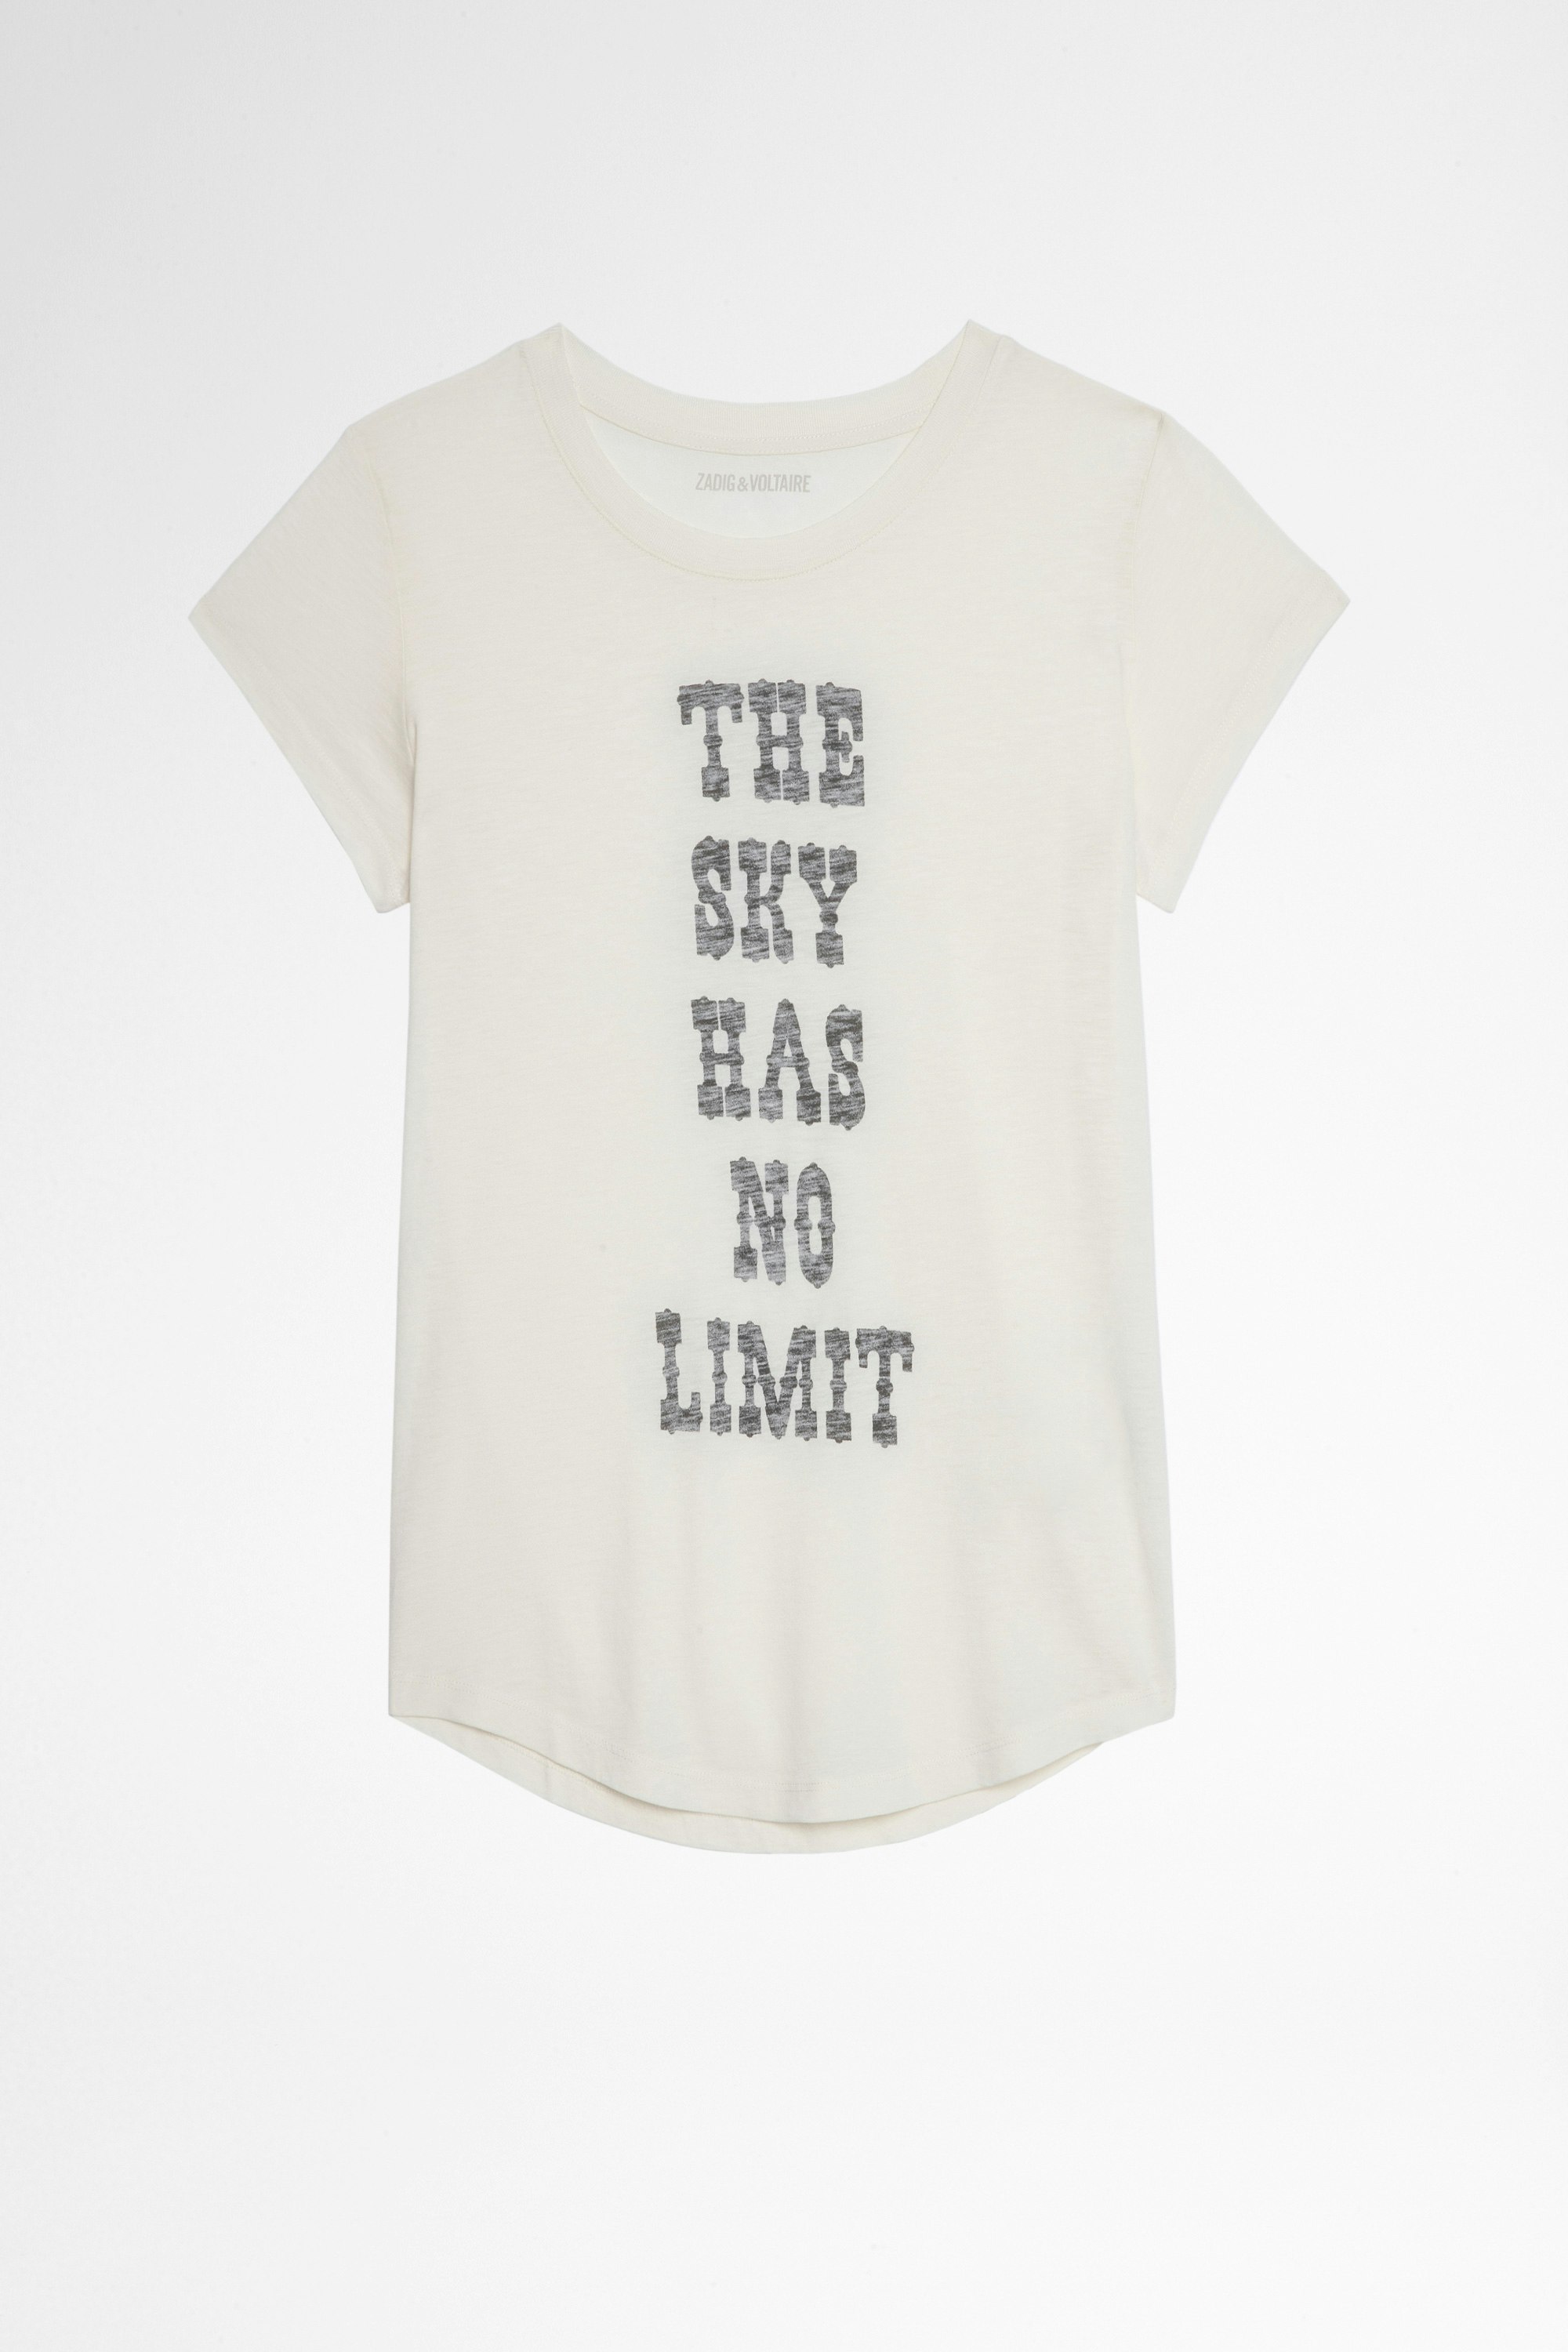 Woop Ｔシャツ White The sky has no limit t-shirt